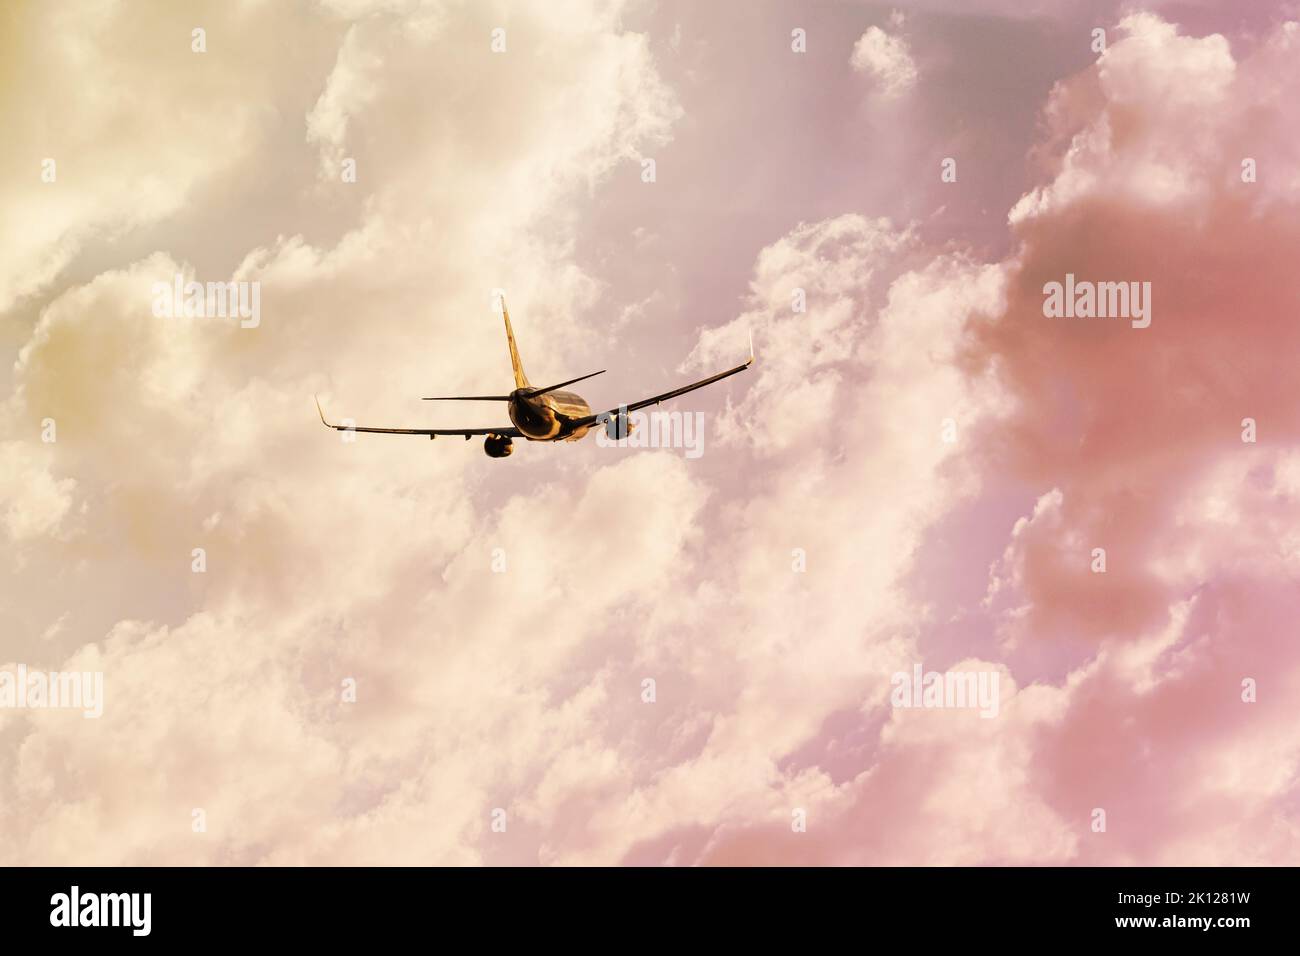 Silhouette of an airplane taking off high into the sky at sunset with a warm shade of clouds Stock Photo